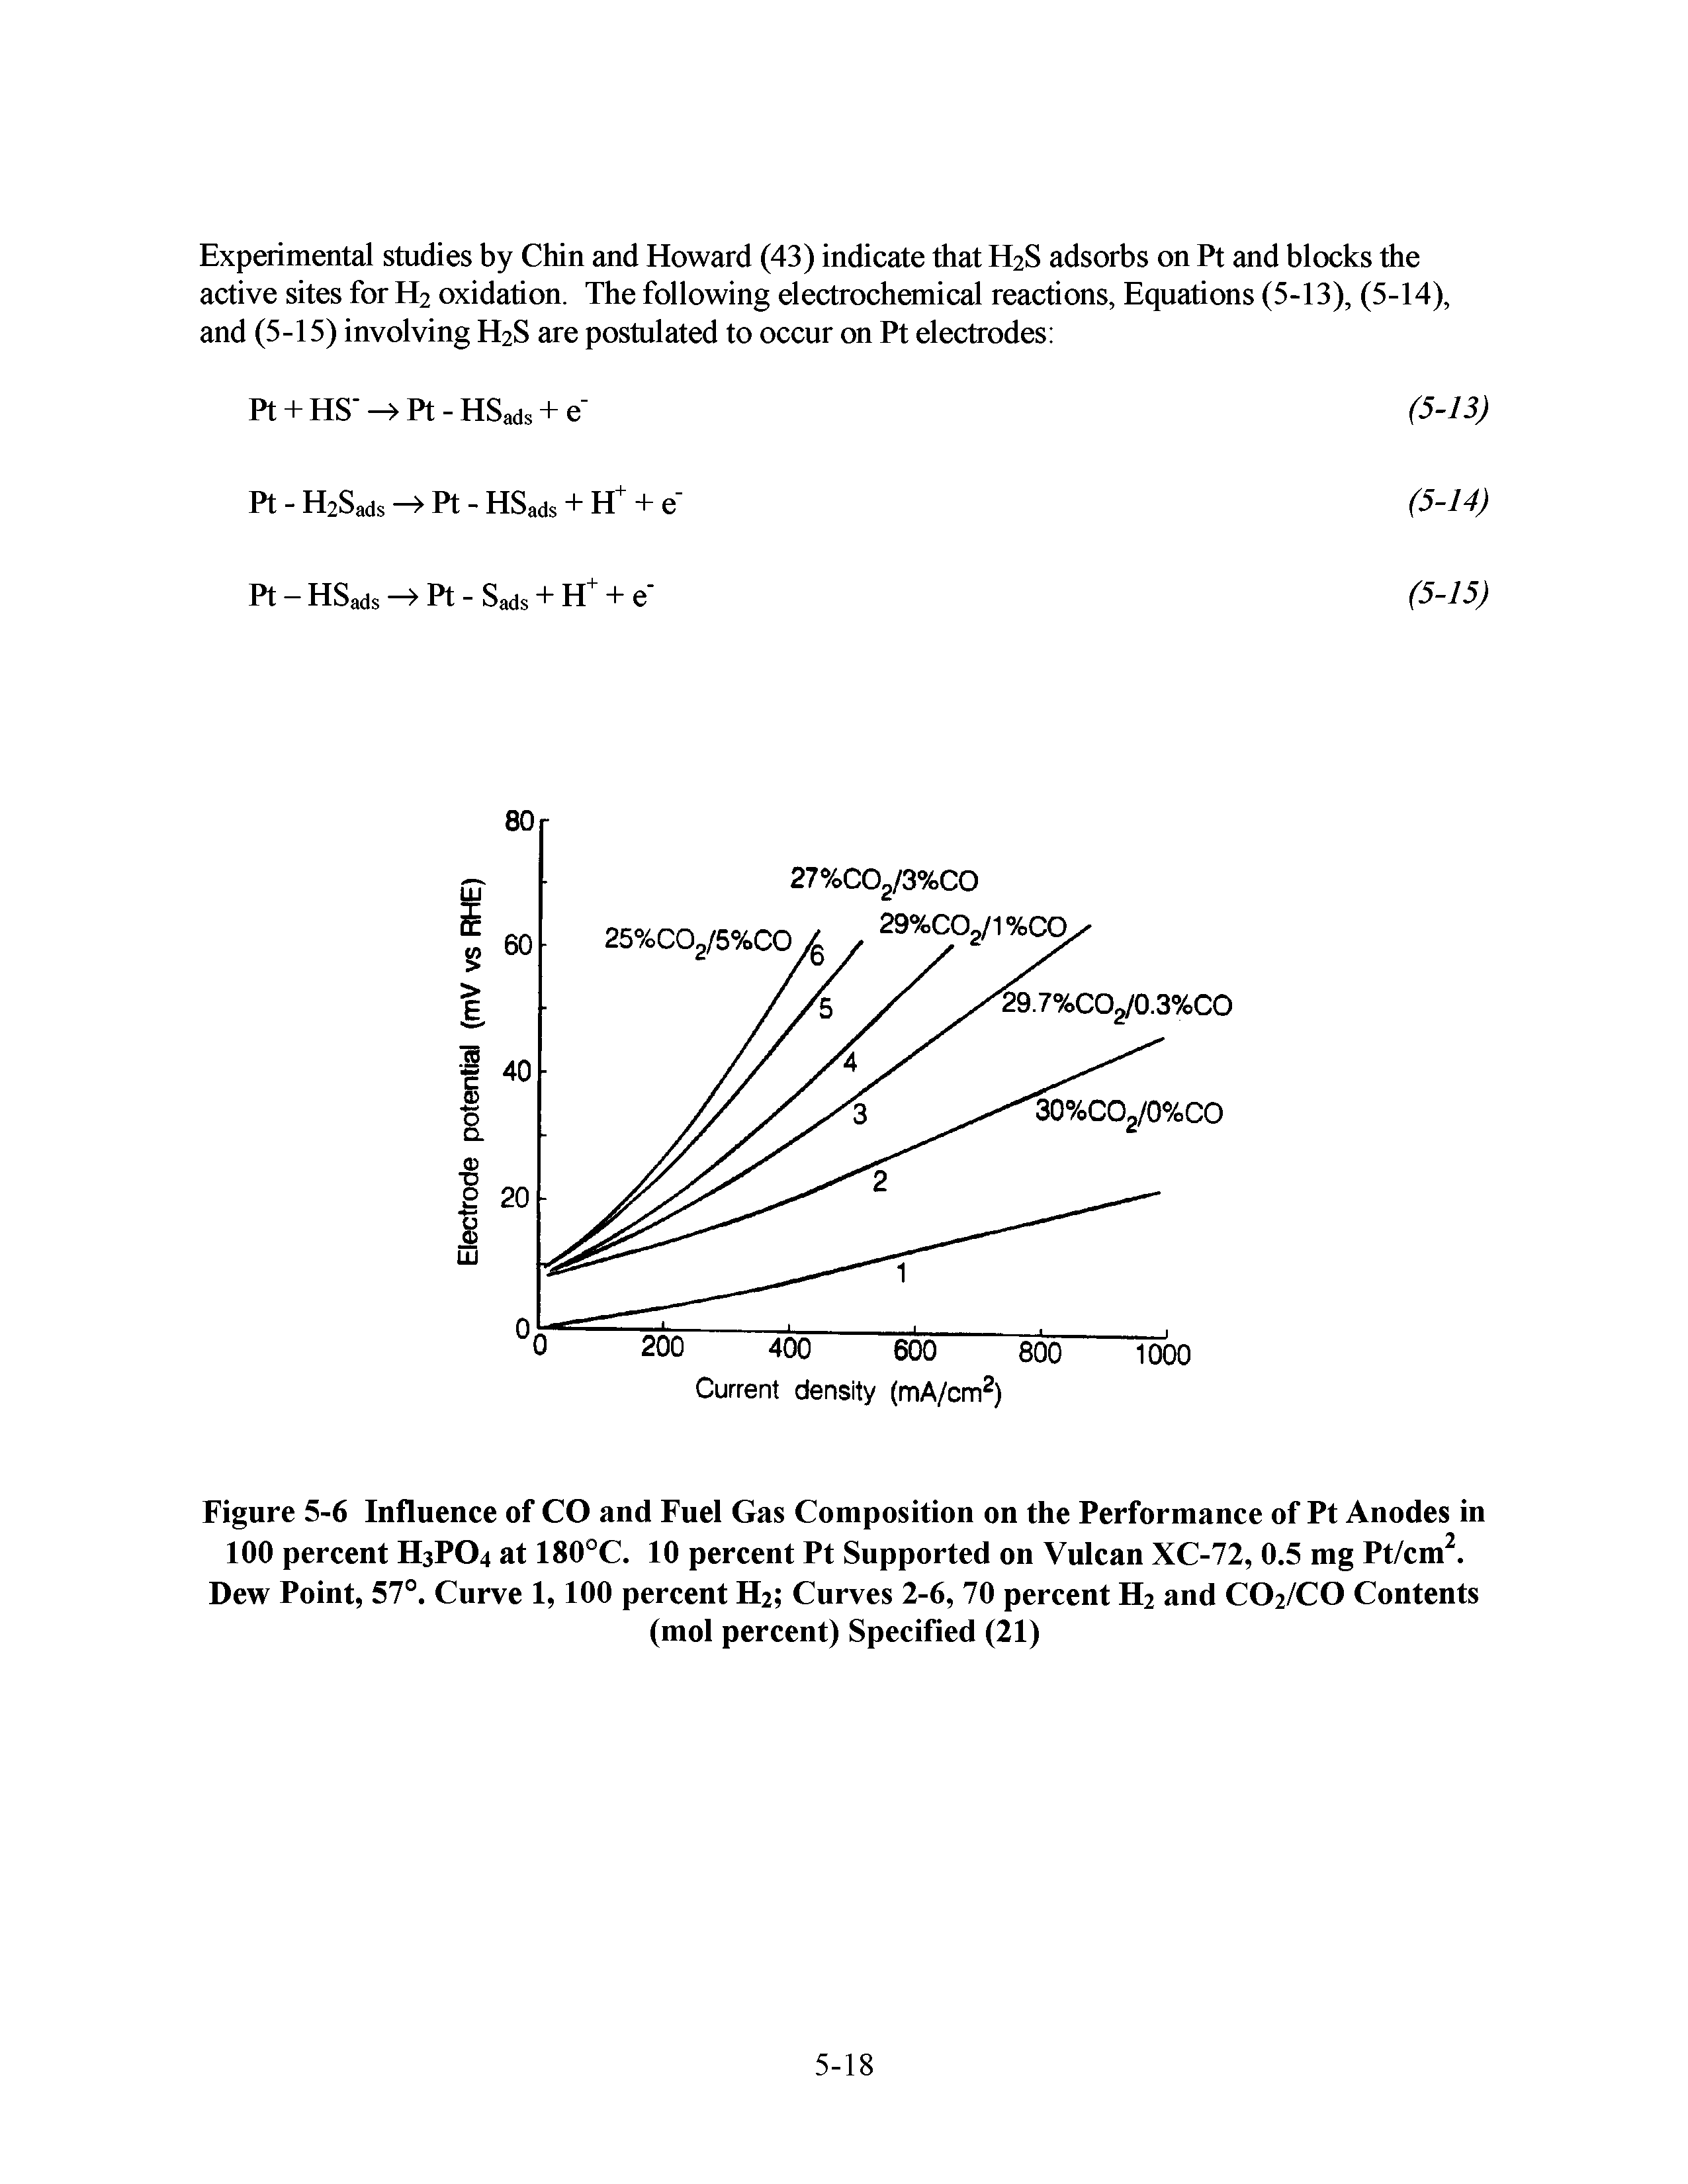 Figure 5-6 Influence of CO and Fuel Gas Composition on the Performance of Pt Anodes in 100 percent H3PO4 at 180°C. 10 percent Pt Supported on Vulcan XC-72, 0.5 mg Pt/cm. Dew Point, 57°. Curve 1,100 percent H2 Curves 2-6, 70 percent H2 and CO2/CO Contents...